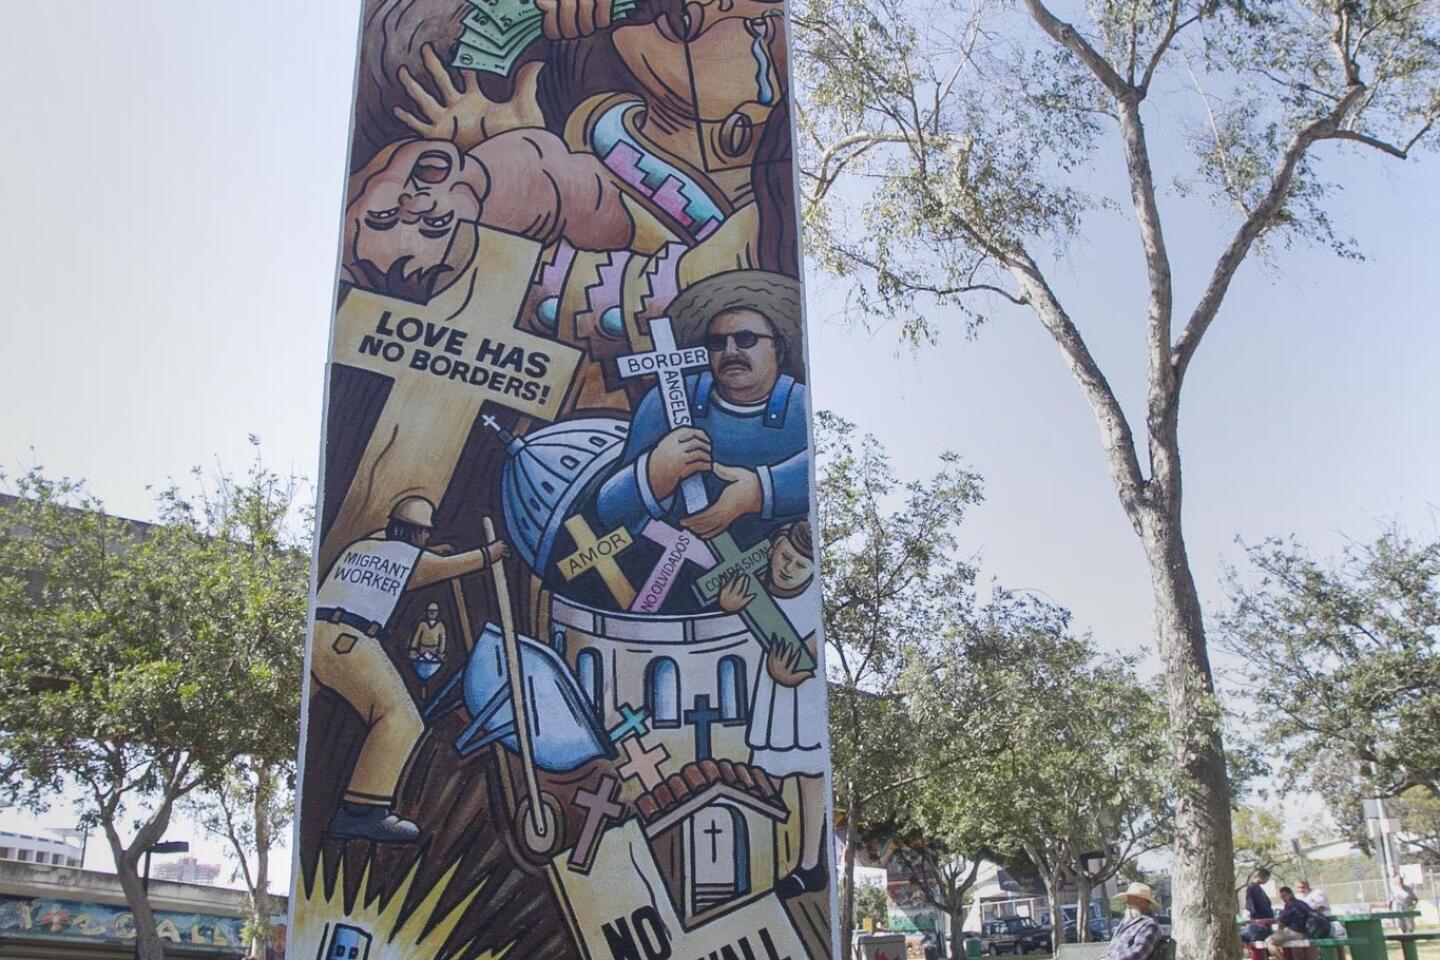 CHICANO PARK in SAN DIEGO, mural by SALVADOR BARAJAS. Song by